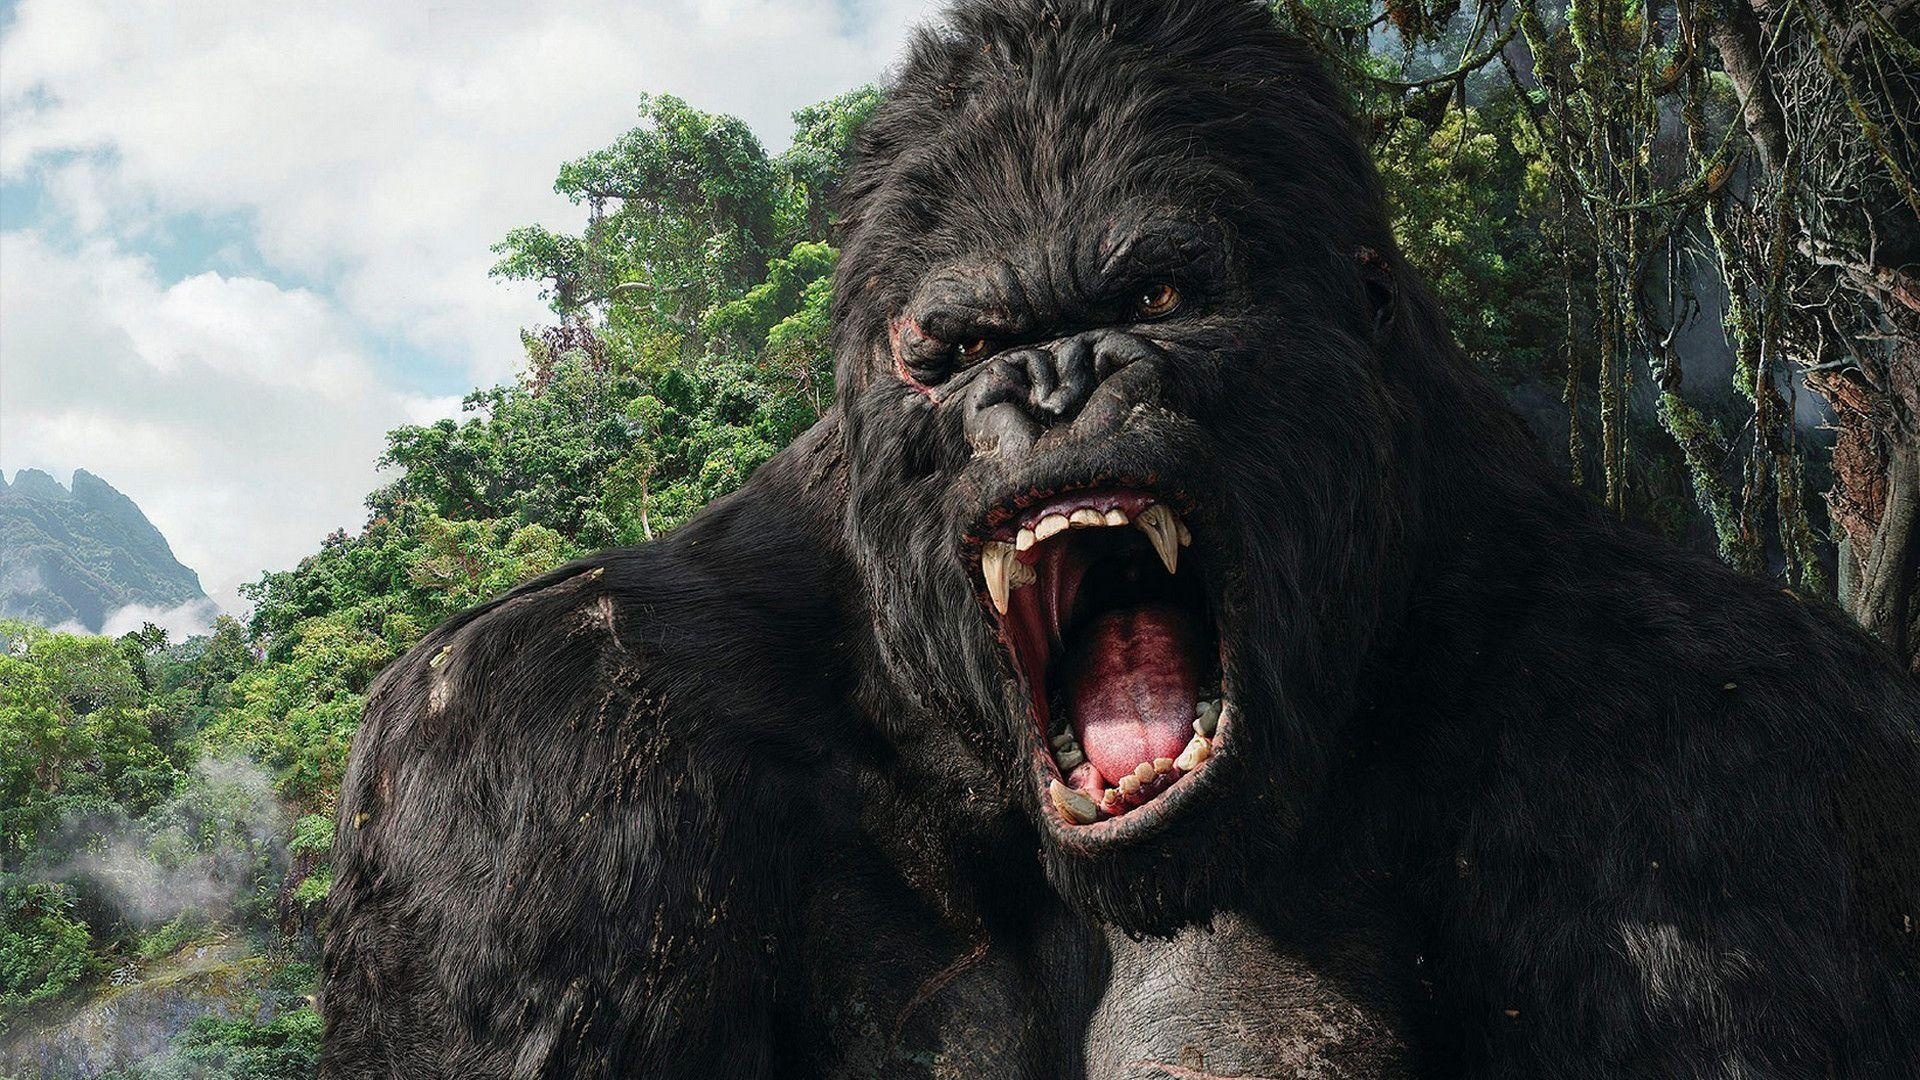 King Kong: The second live action remake of the 1933 classic, 2005 movie. 1920x1080 Full HD Wallpaper.